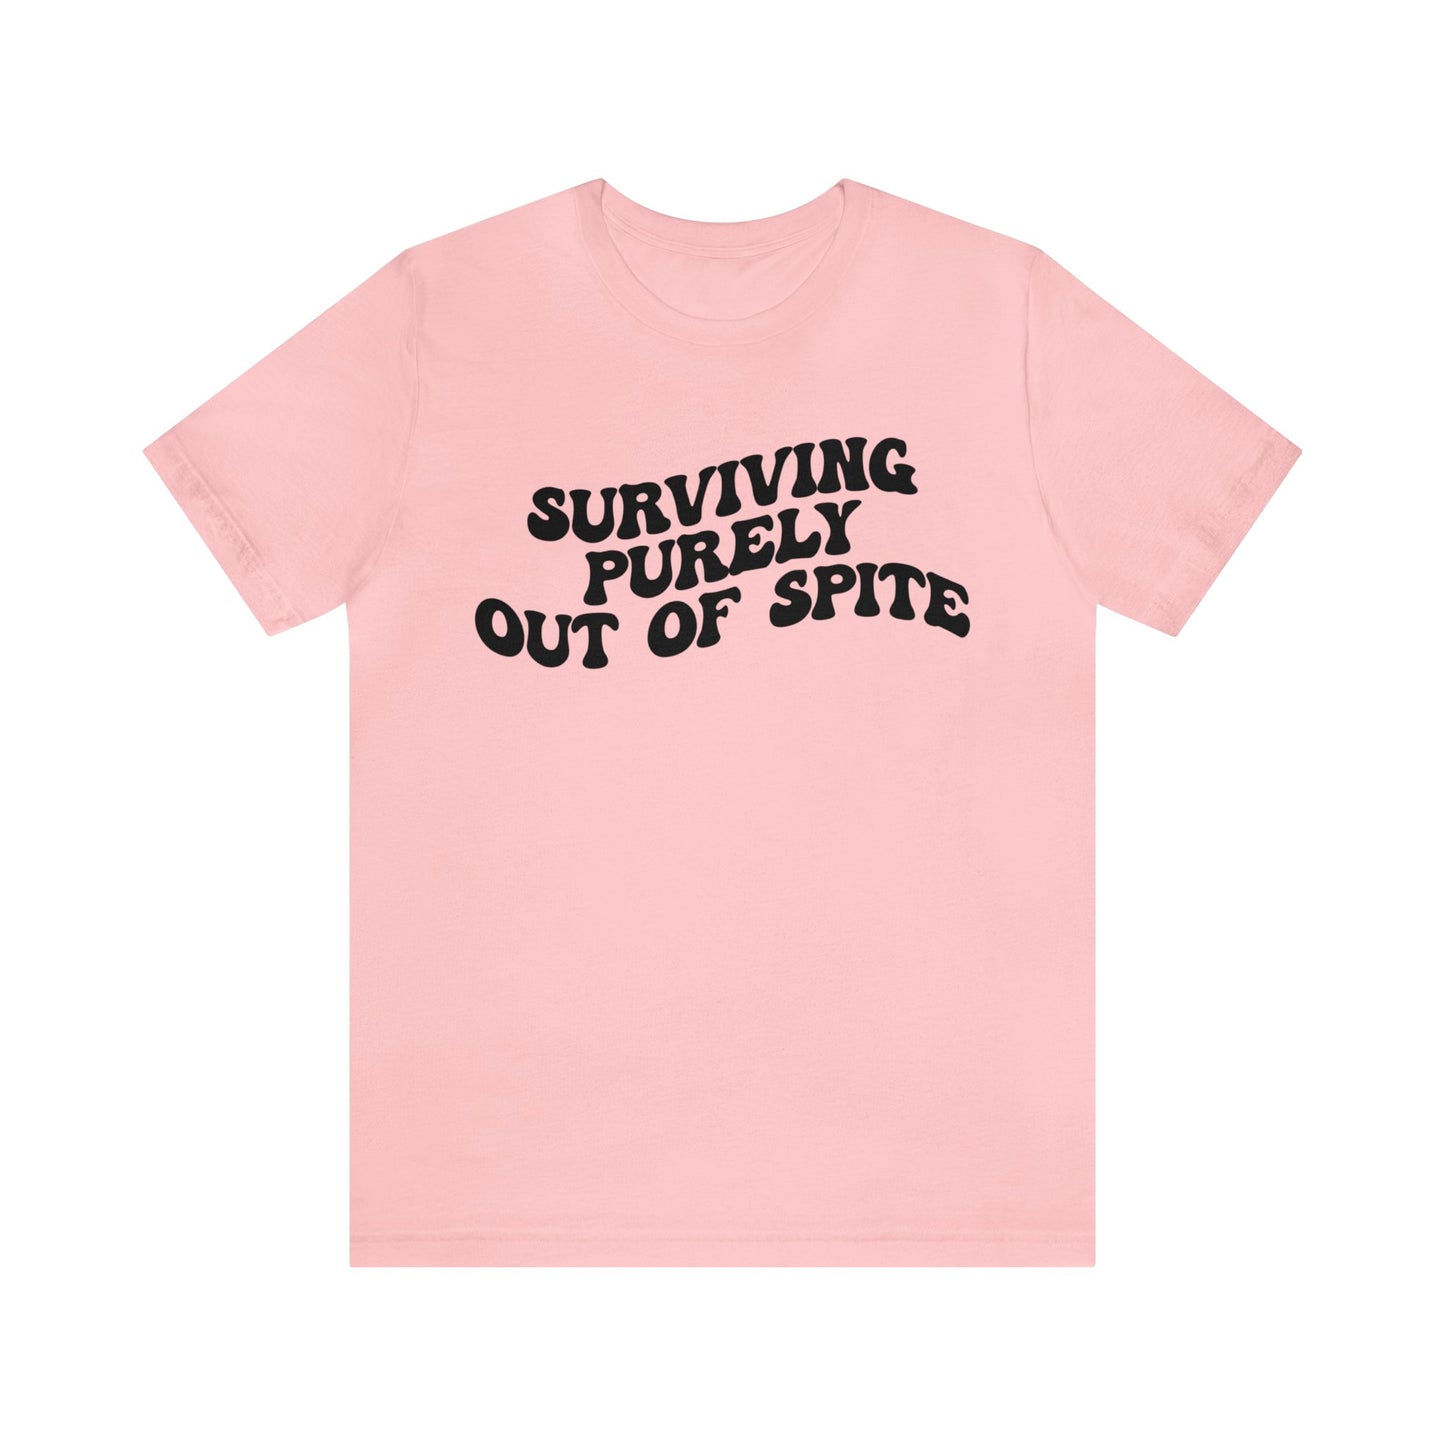 Surviving Purely Out of Spite Shirt, Mental Health, Strong Woman, Cancer Survivor, Survivor Shirt, Strong Empowered Women, Iron Lady, T1408